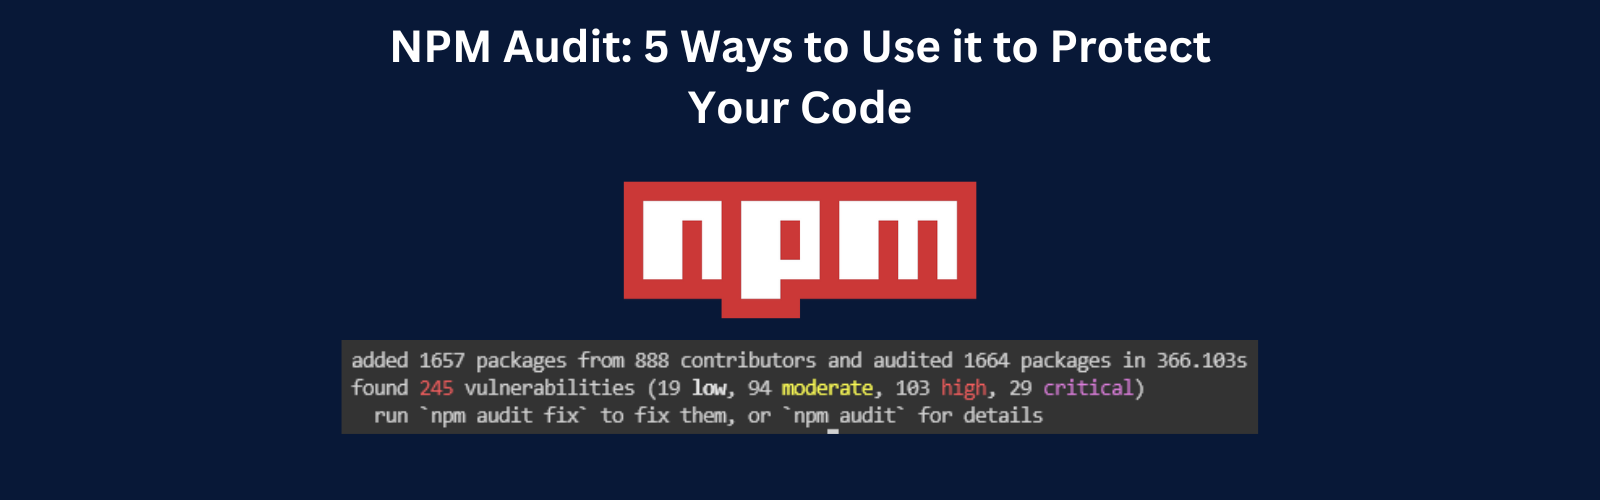 NPM Audit: 5 Ways to Use it to Protect Your Code main image